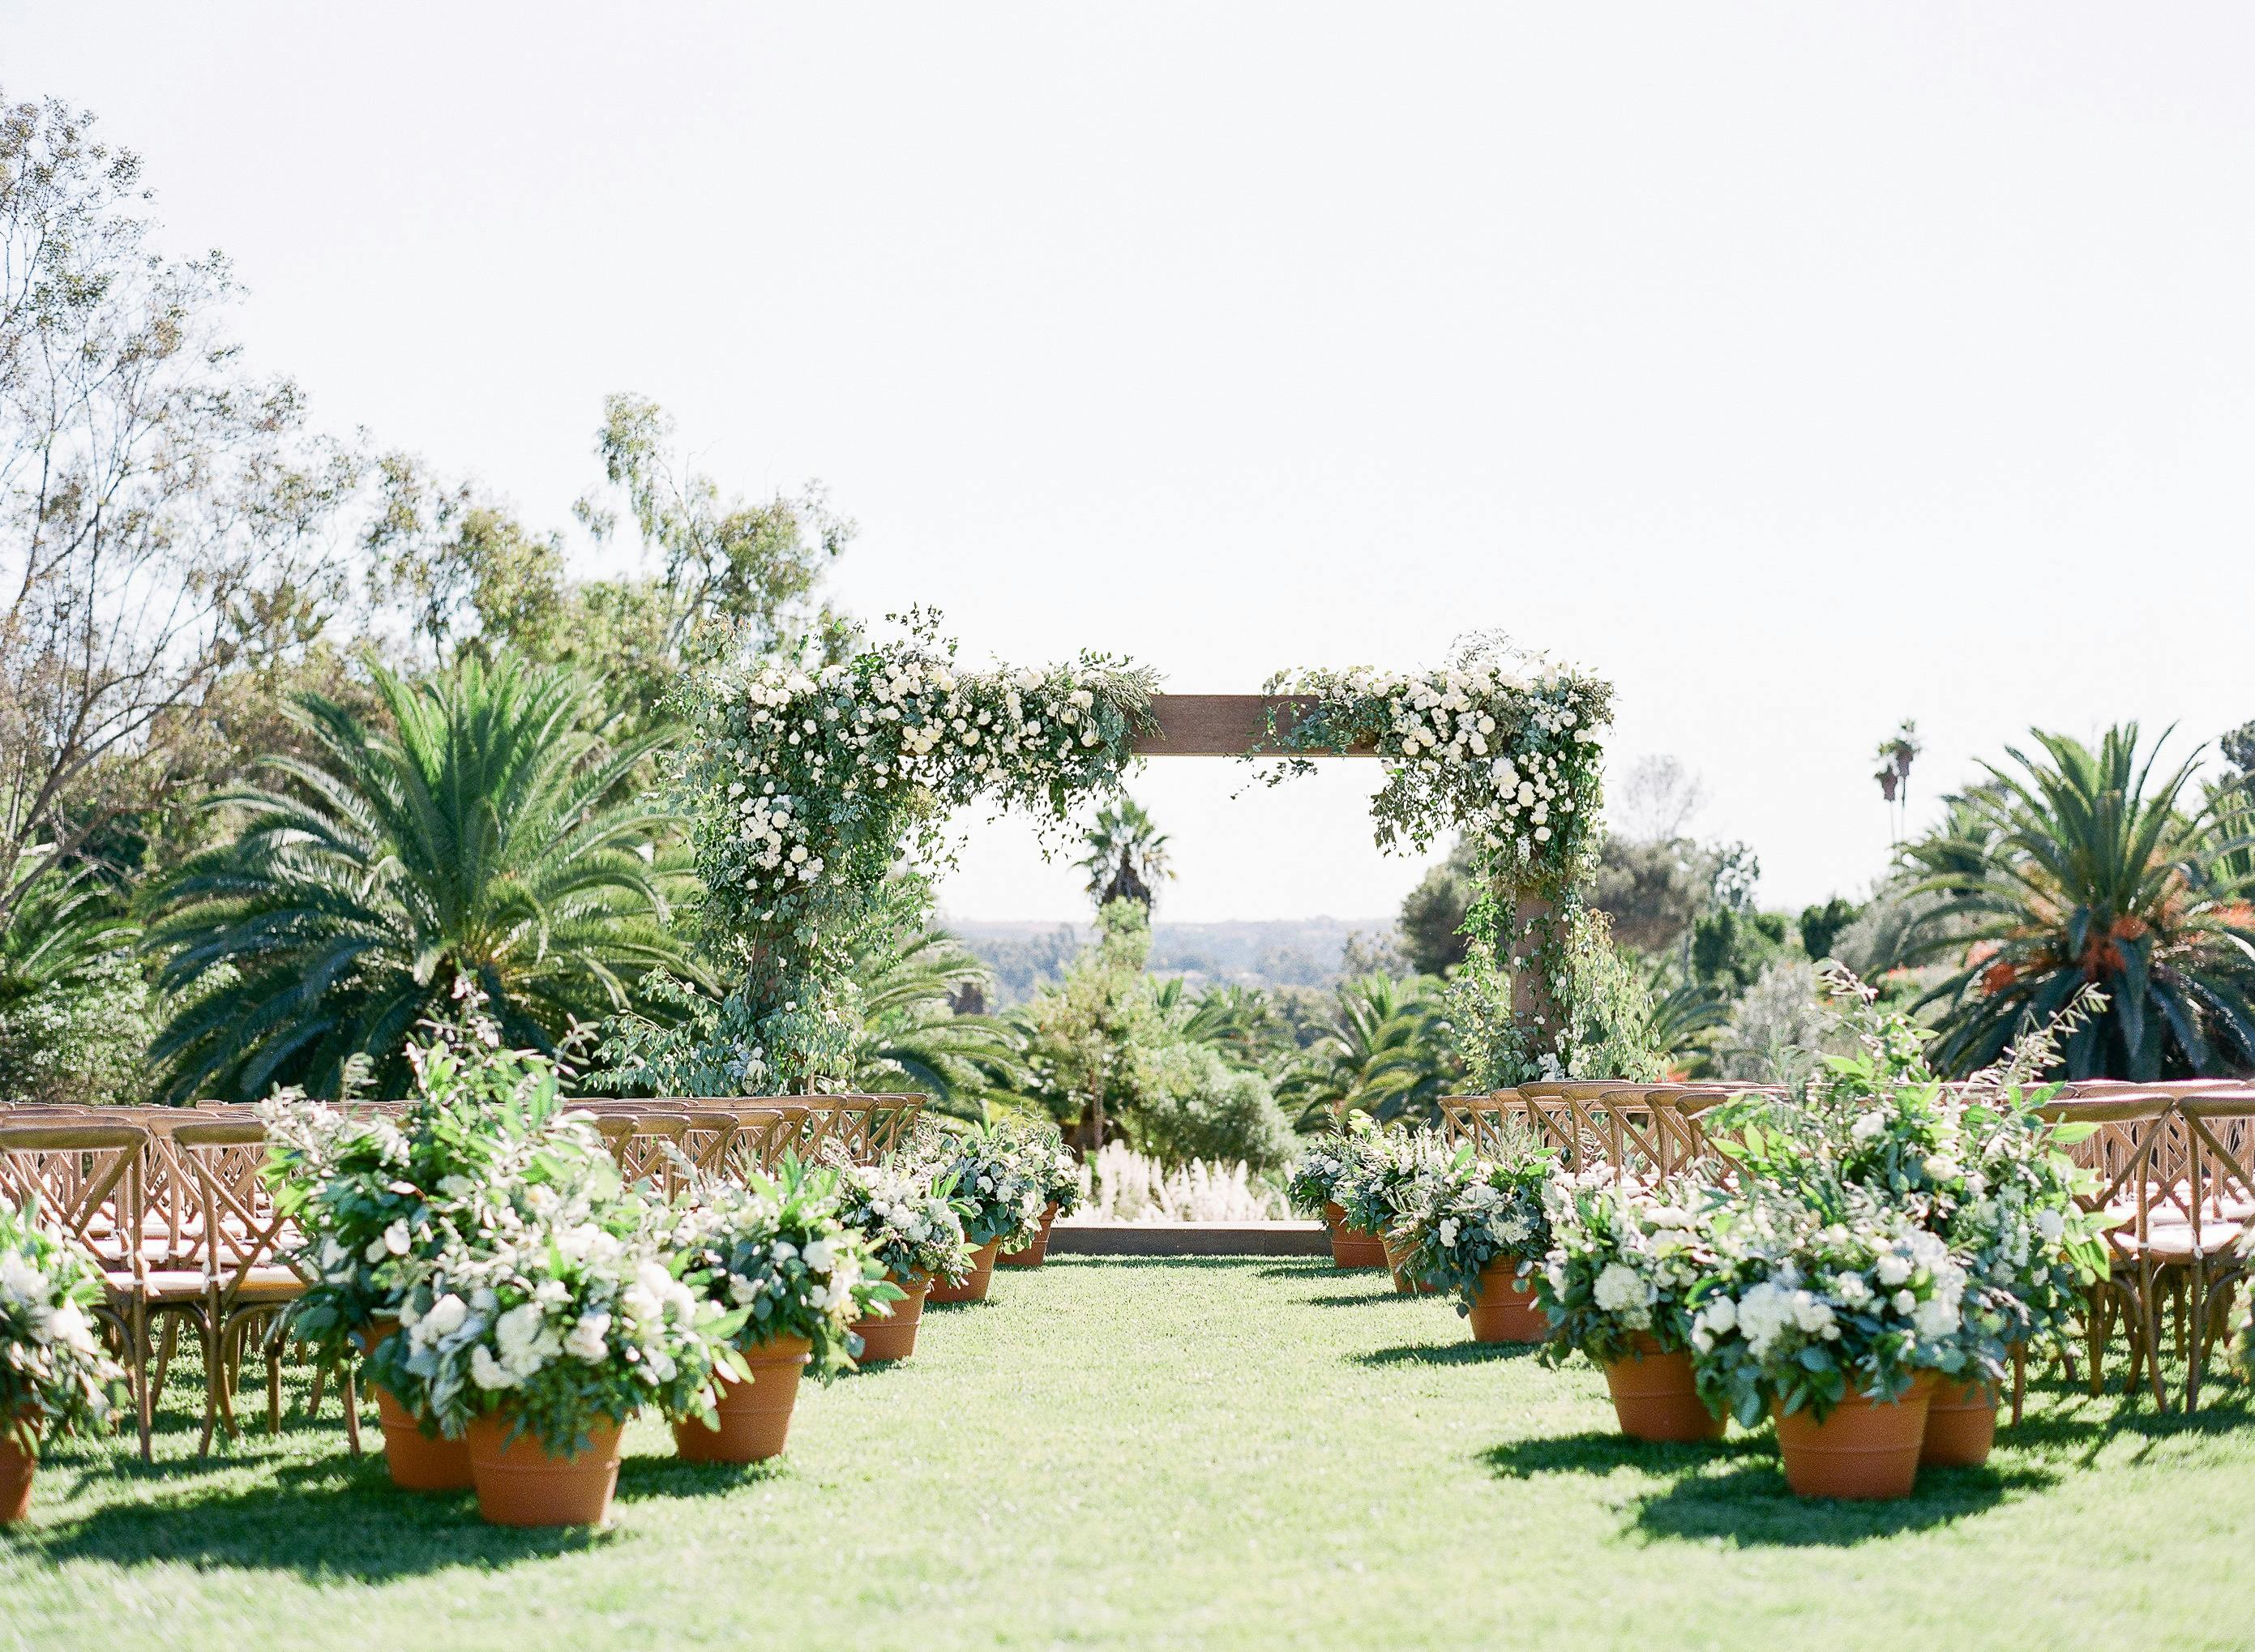 Outdoor wedding aisle with potted plants and natural greenery.